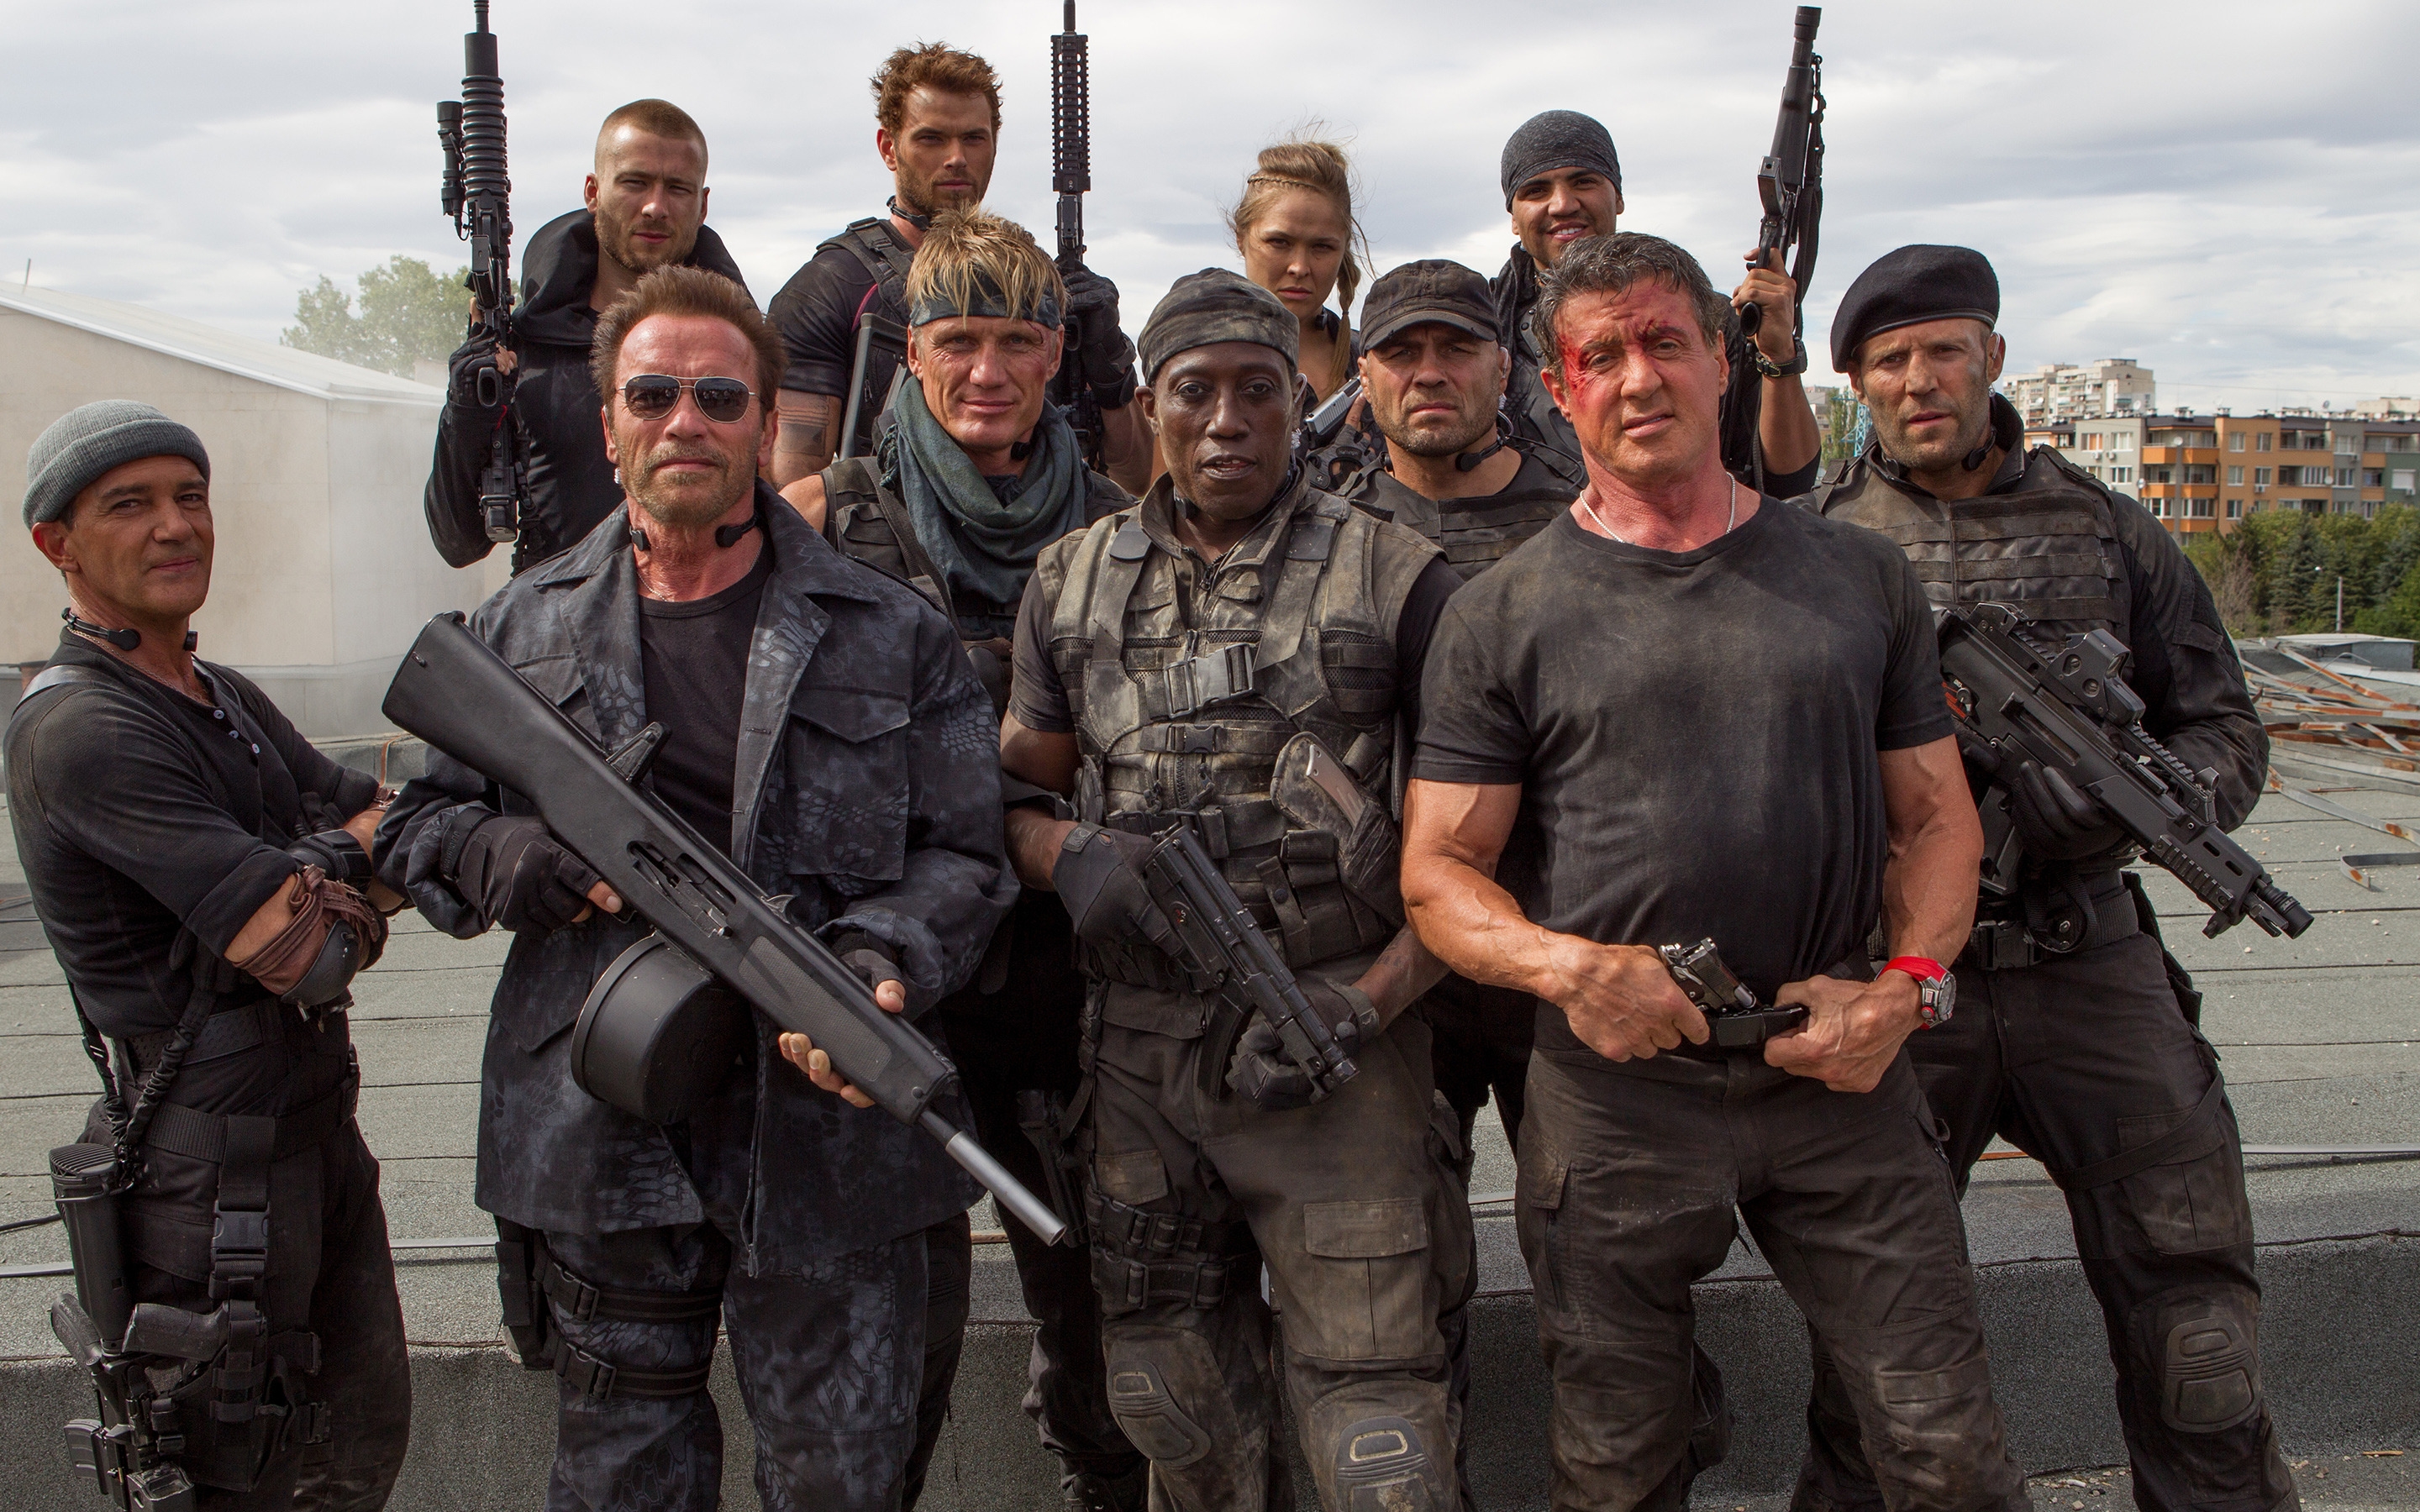 The Expendables 3 Cast for 2880 x 1800 Retina Display resolution